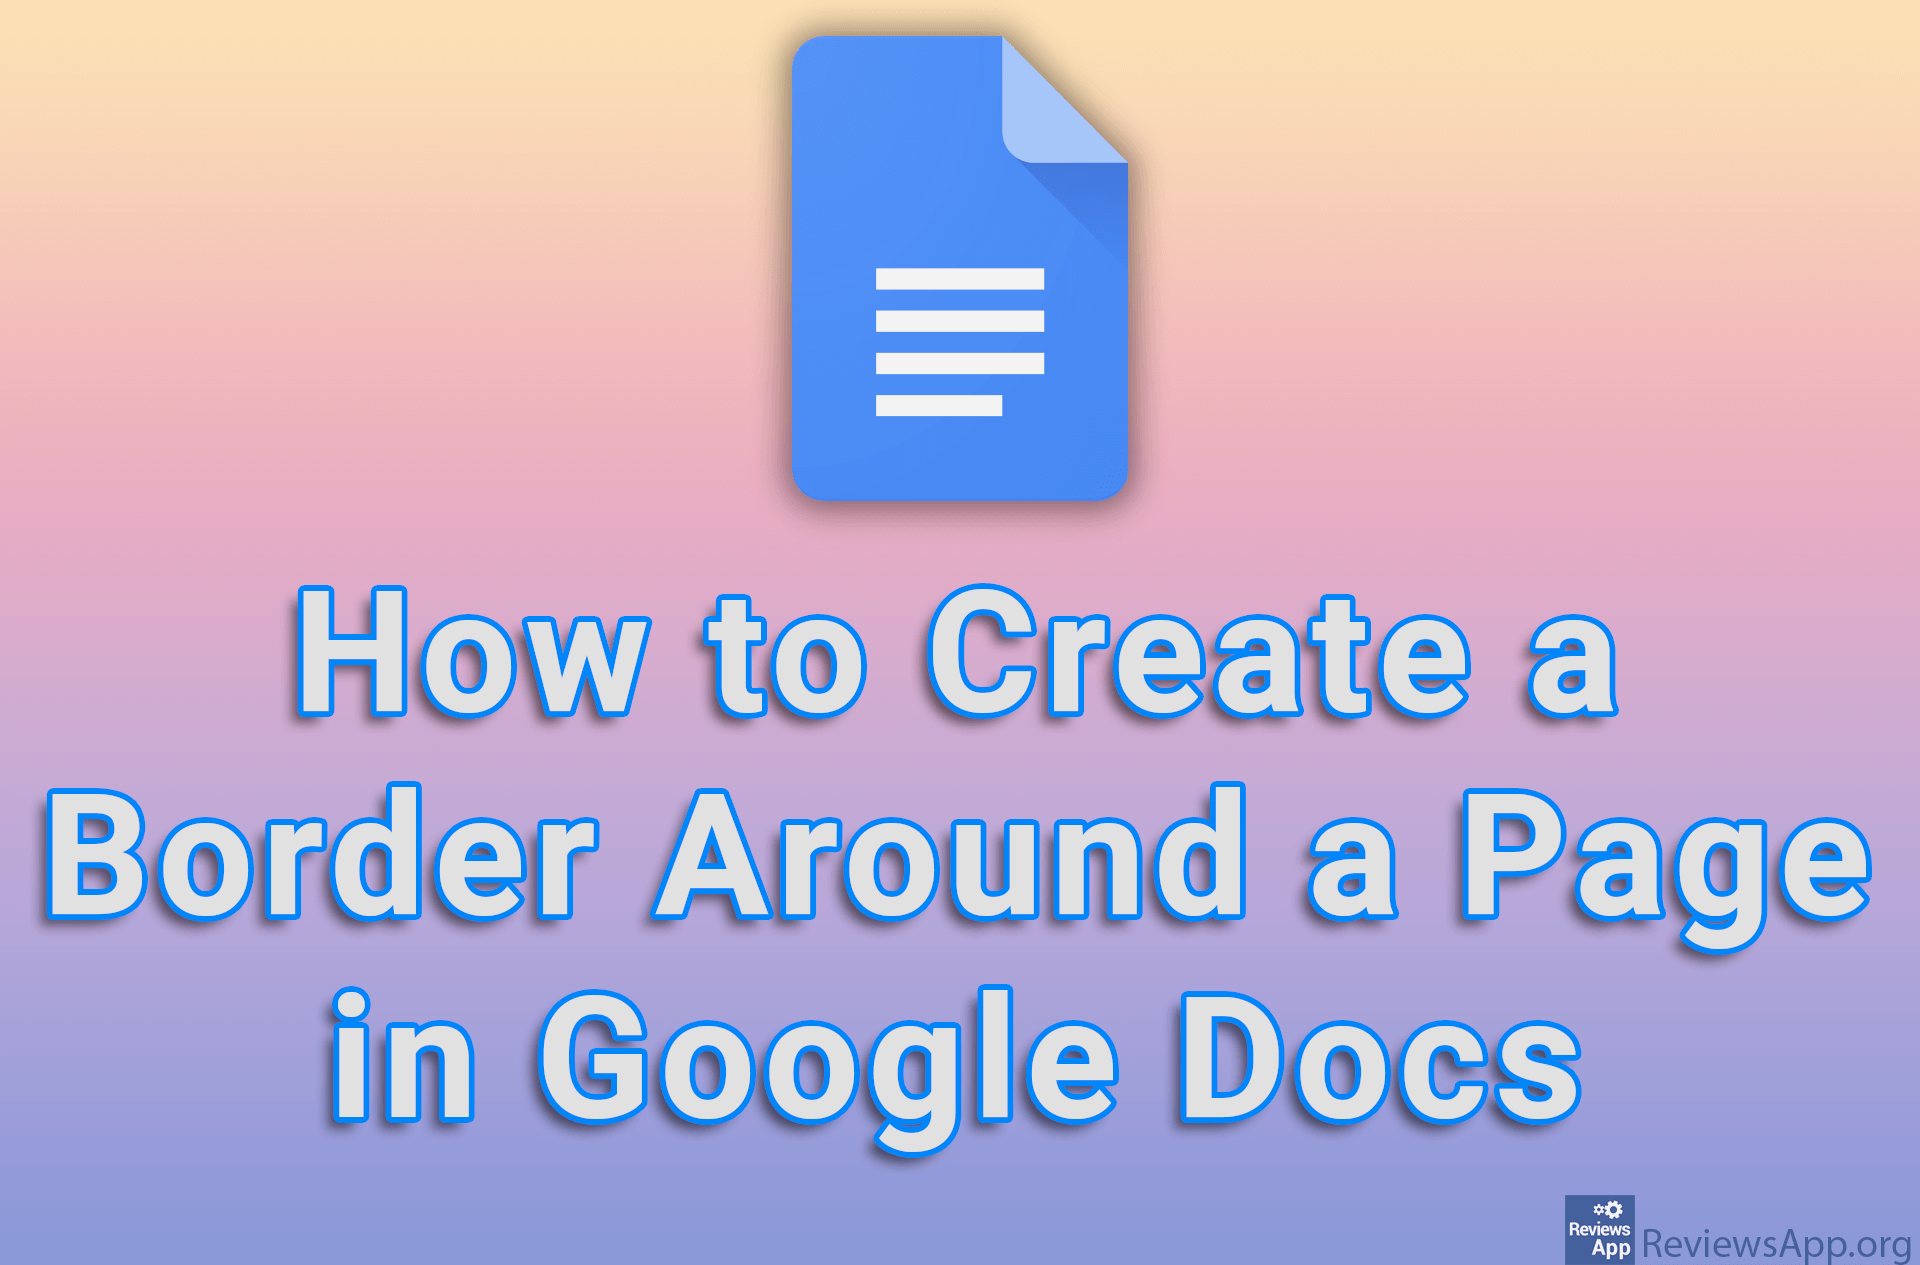 how-to-add-a-page-border-to-google-docs-tutorial-youtube